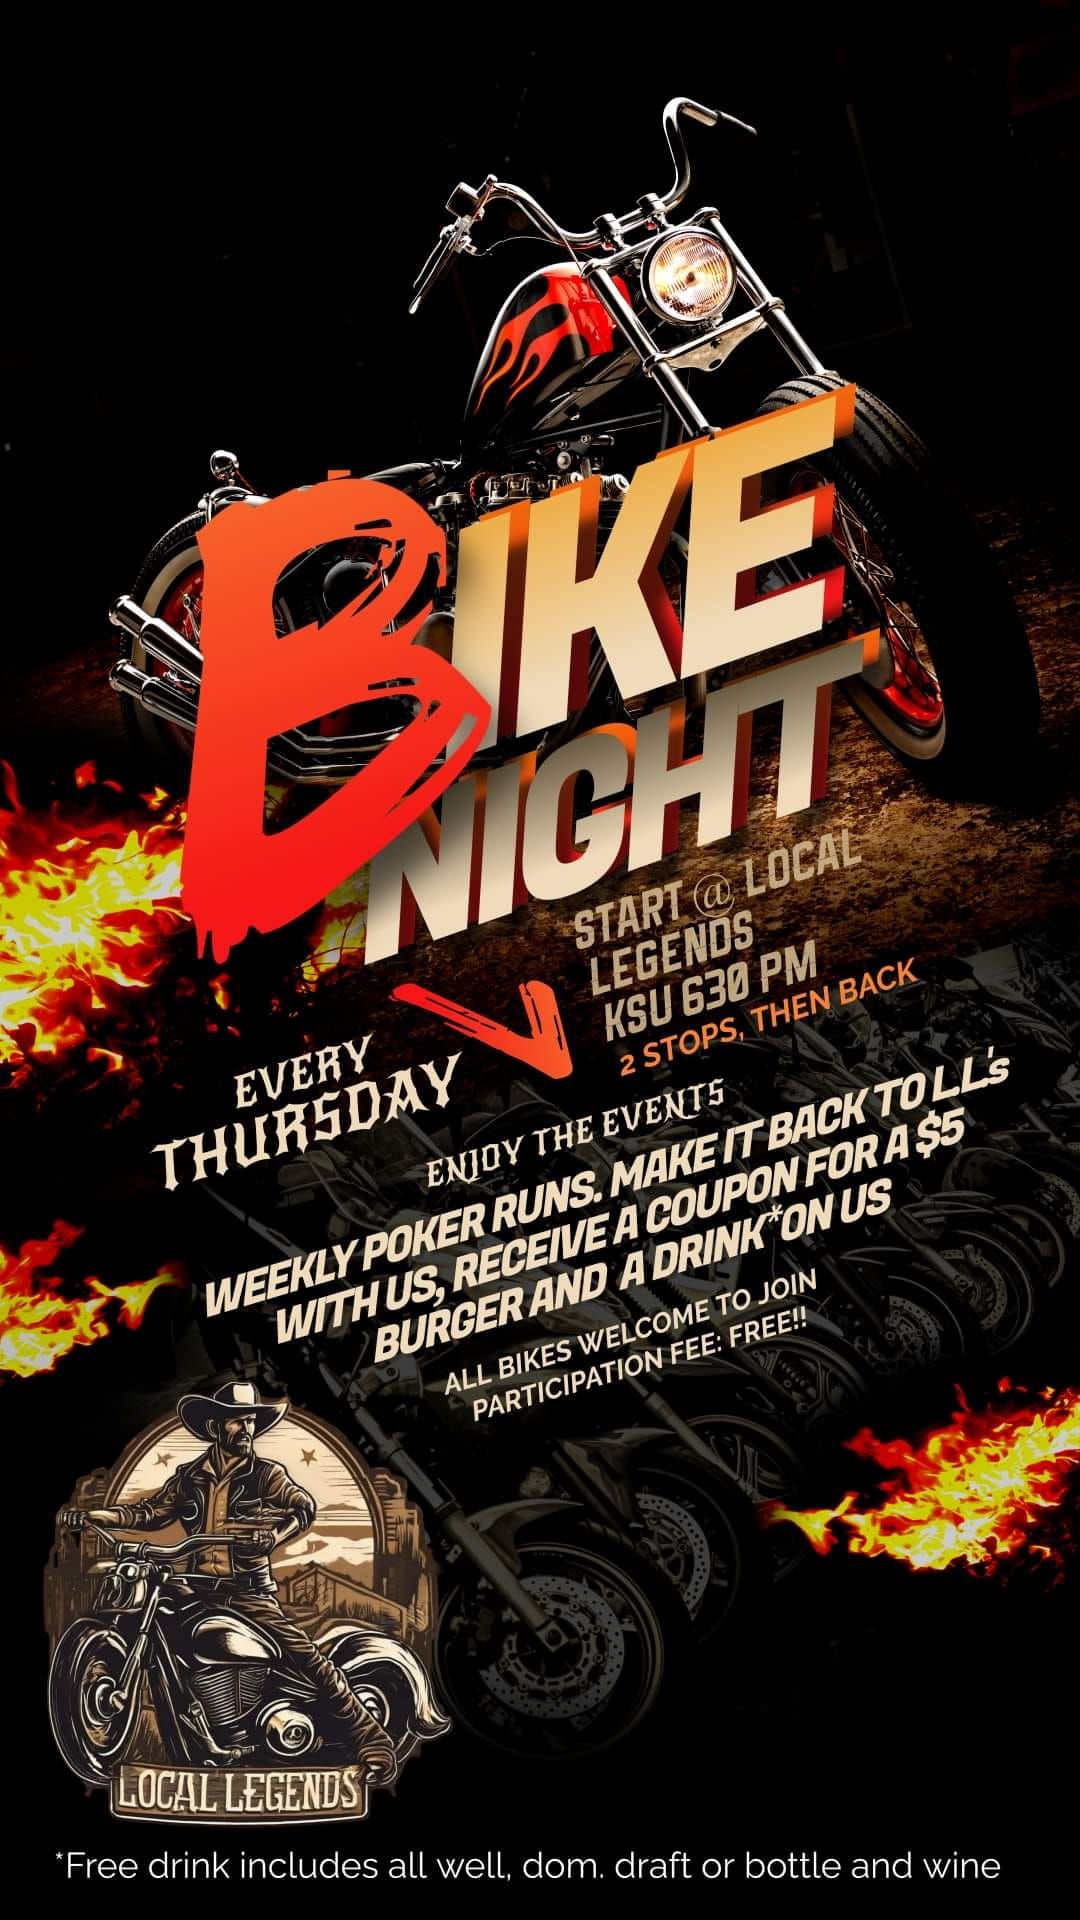 "The People's Ride" Thursday night motorcycle run